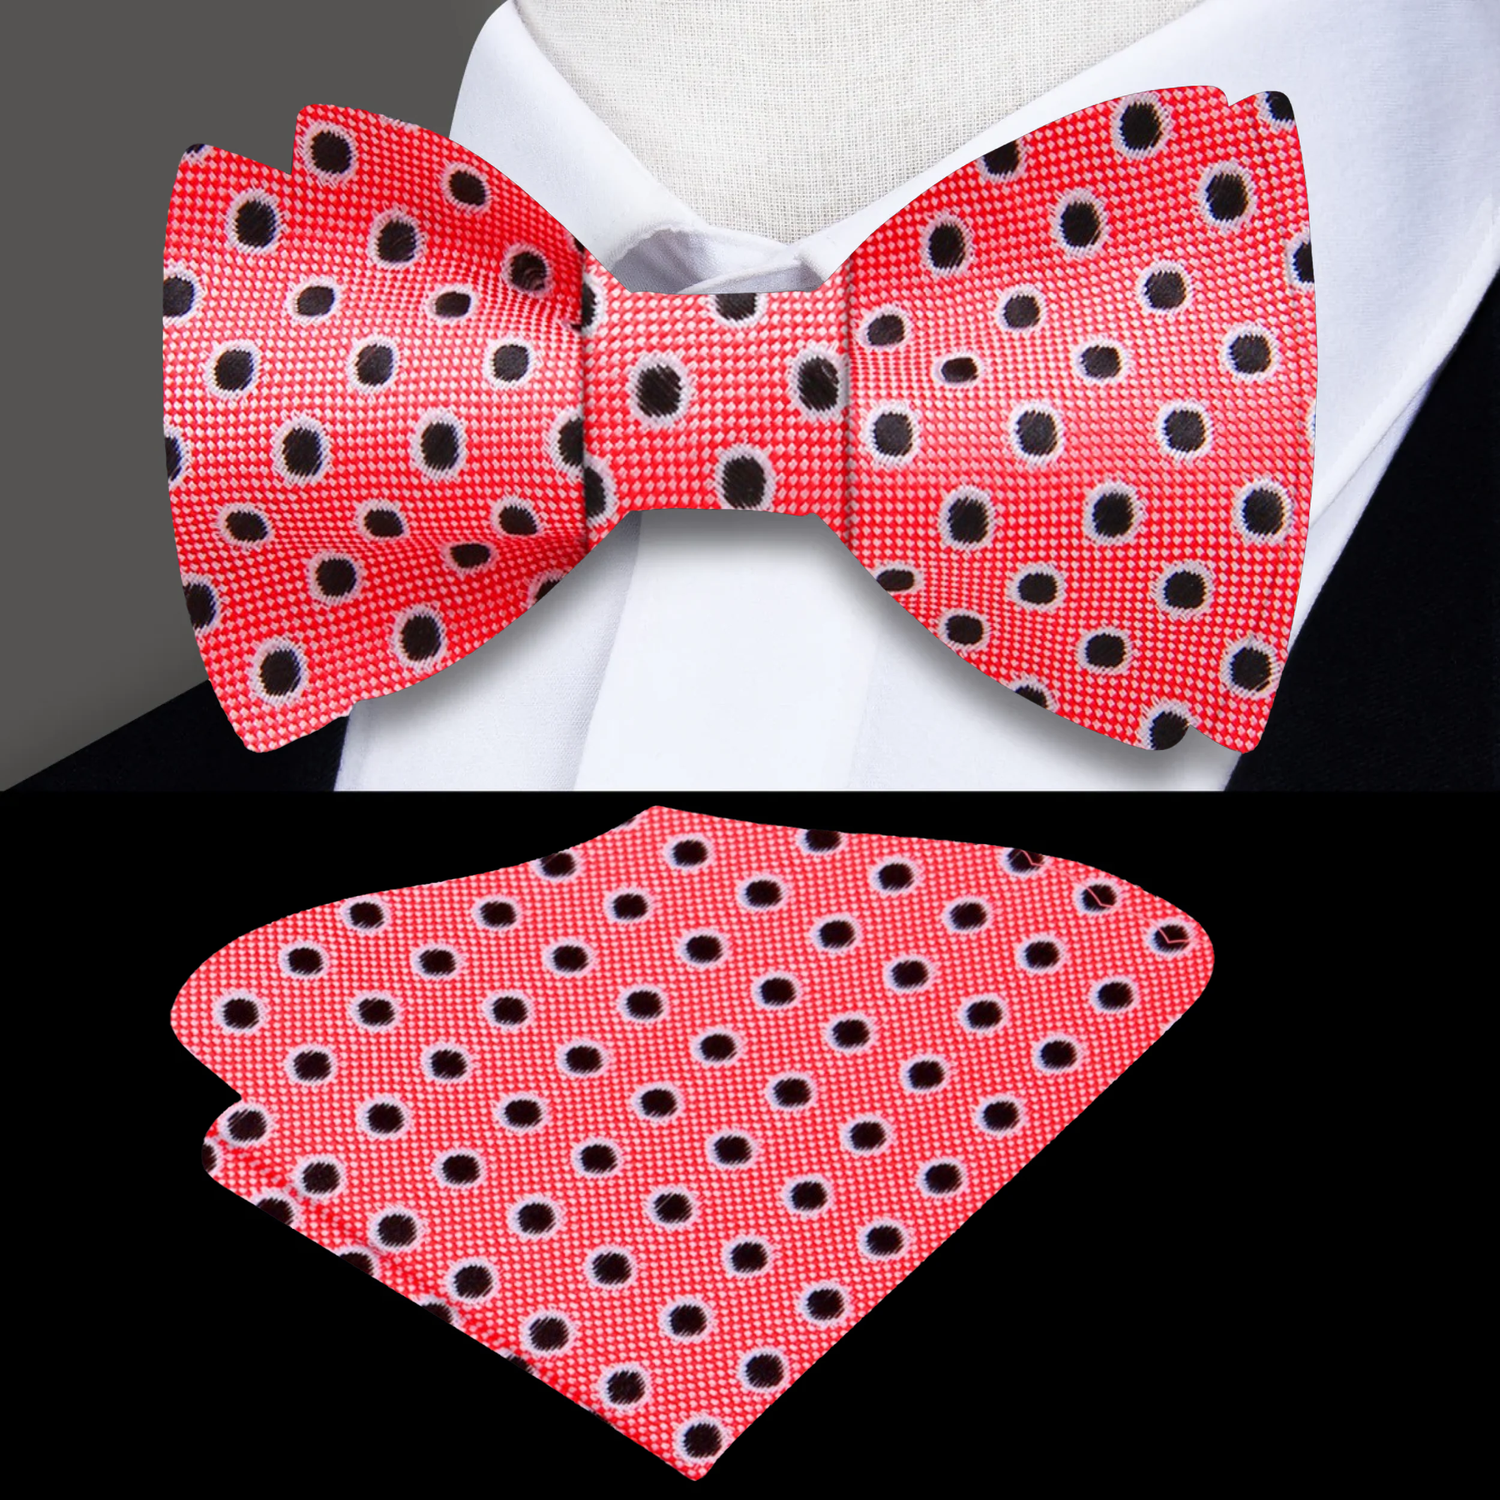 Pink and Black Polka Bow Tie and Pocket Square